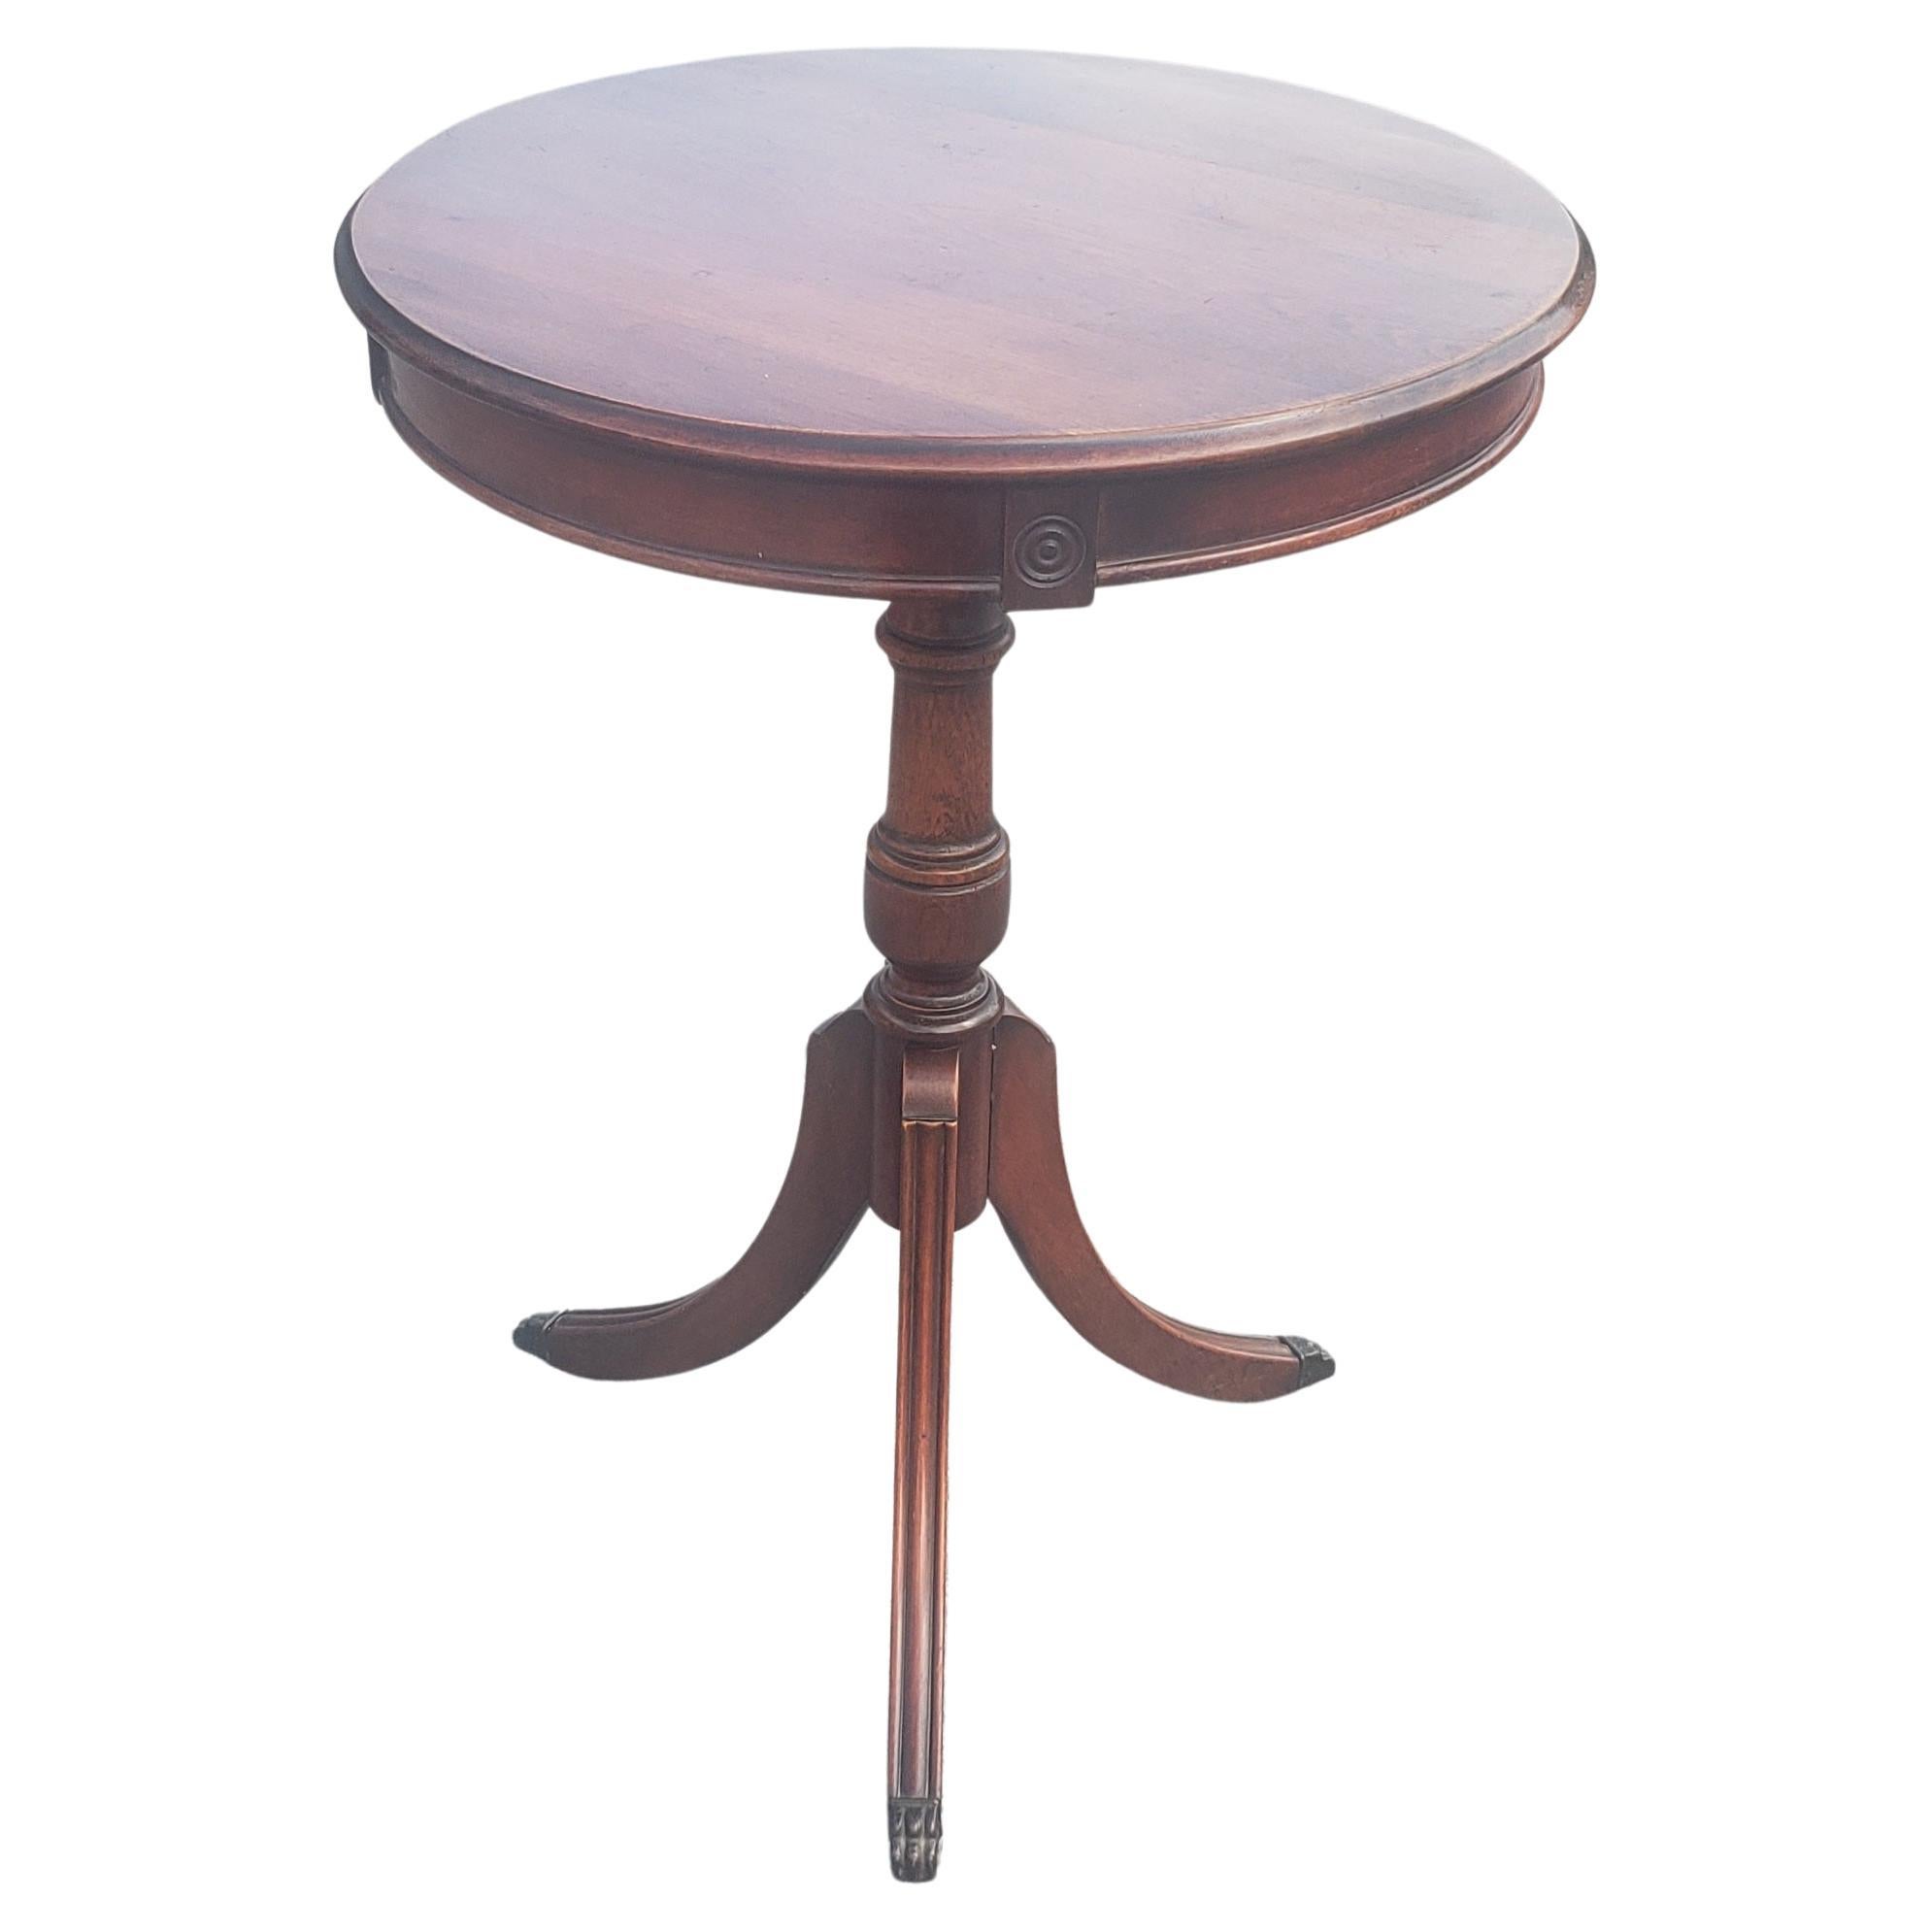 Midcentury Mahogany Pedestal Tripod Drum Side Table with Paw Feet In Good Condition For Sale In Germantown, MD